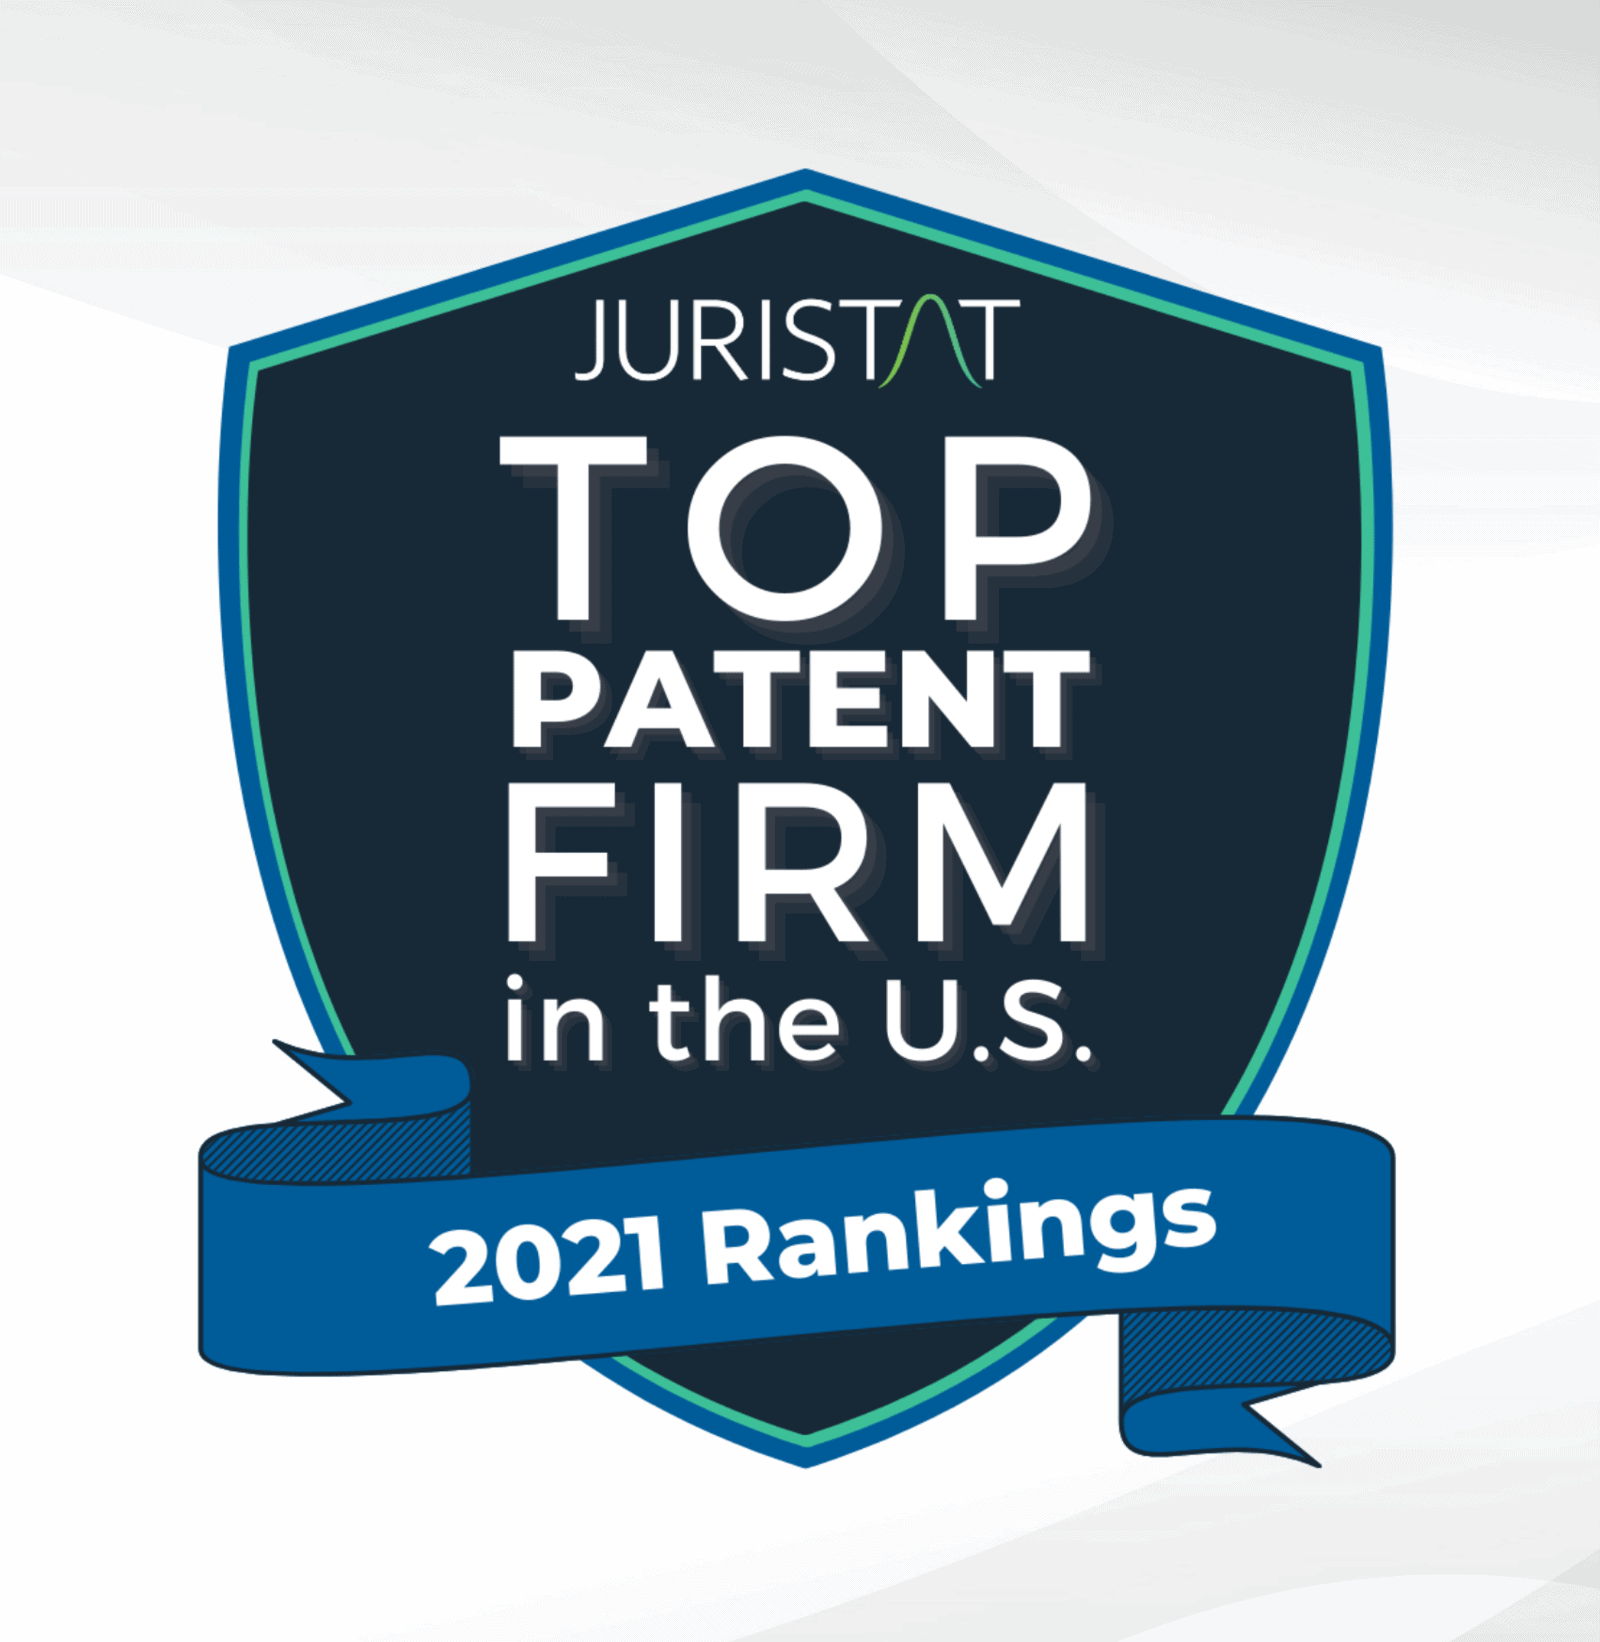 Dority & Manning Recognized as a Top Firm by Juristat